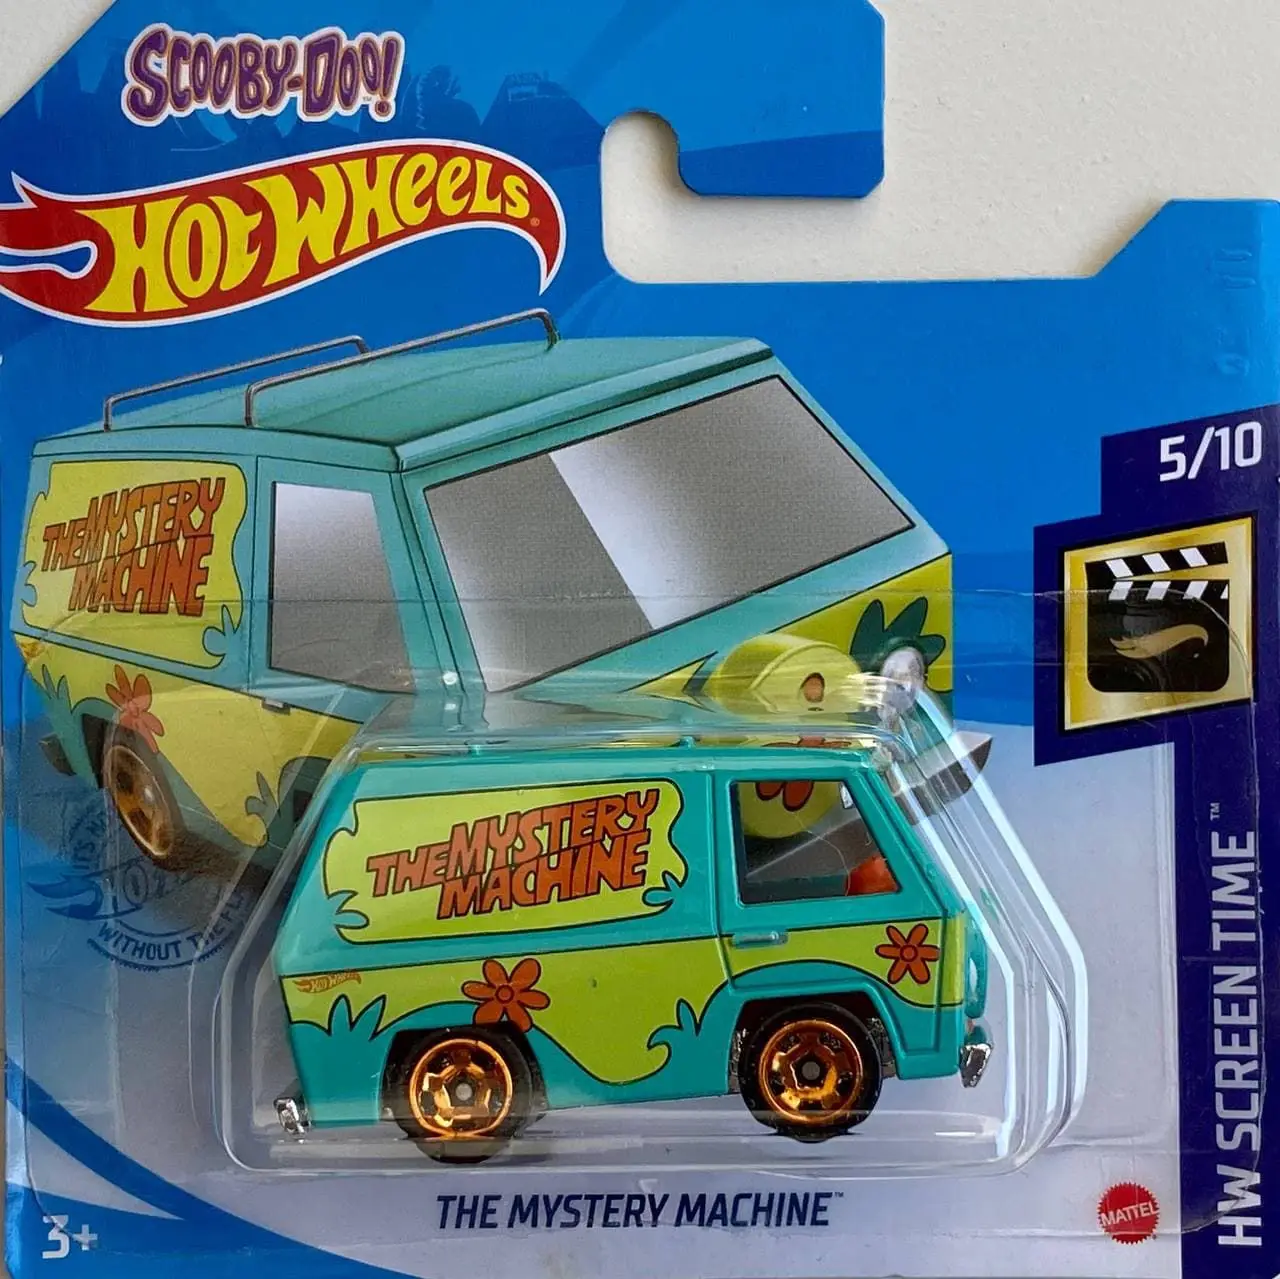 107.250 2021 HOT WHEELS SCREEN TIME 5.10 THE MYSTERY MACHINE SCOOBY-DOO